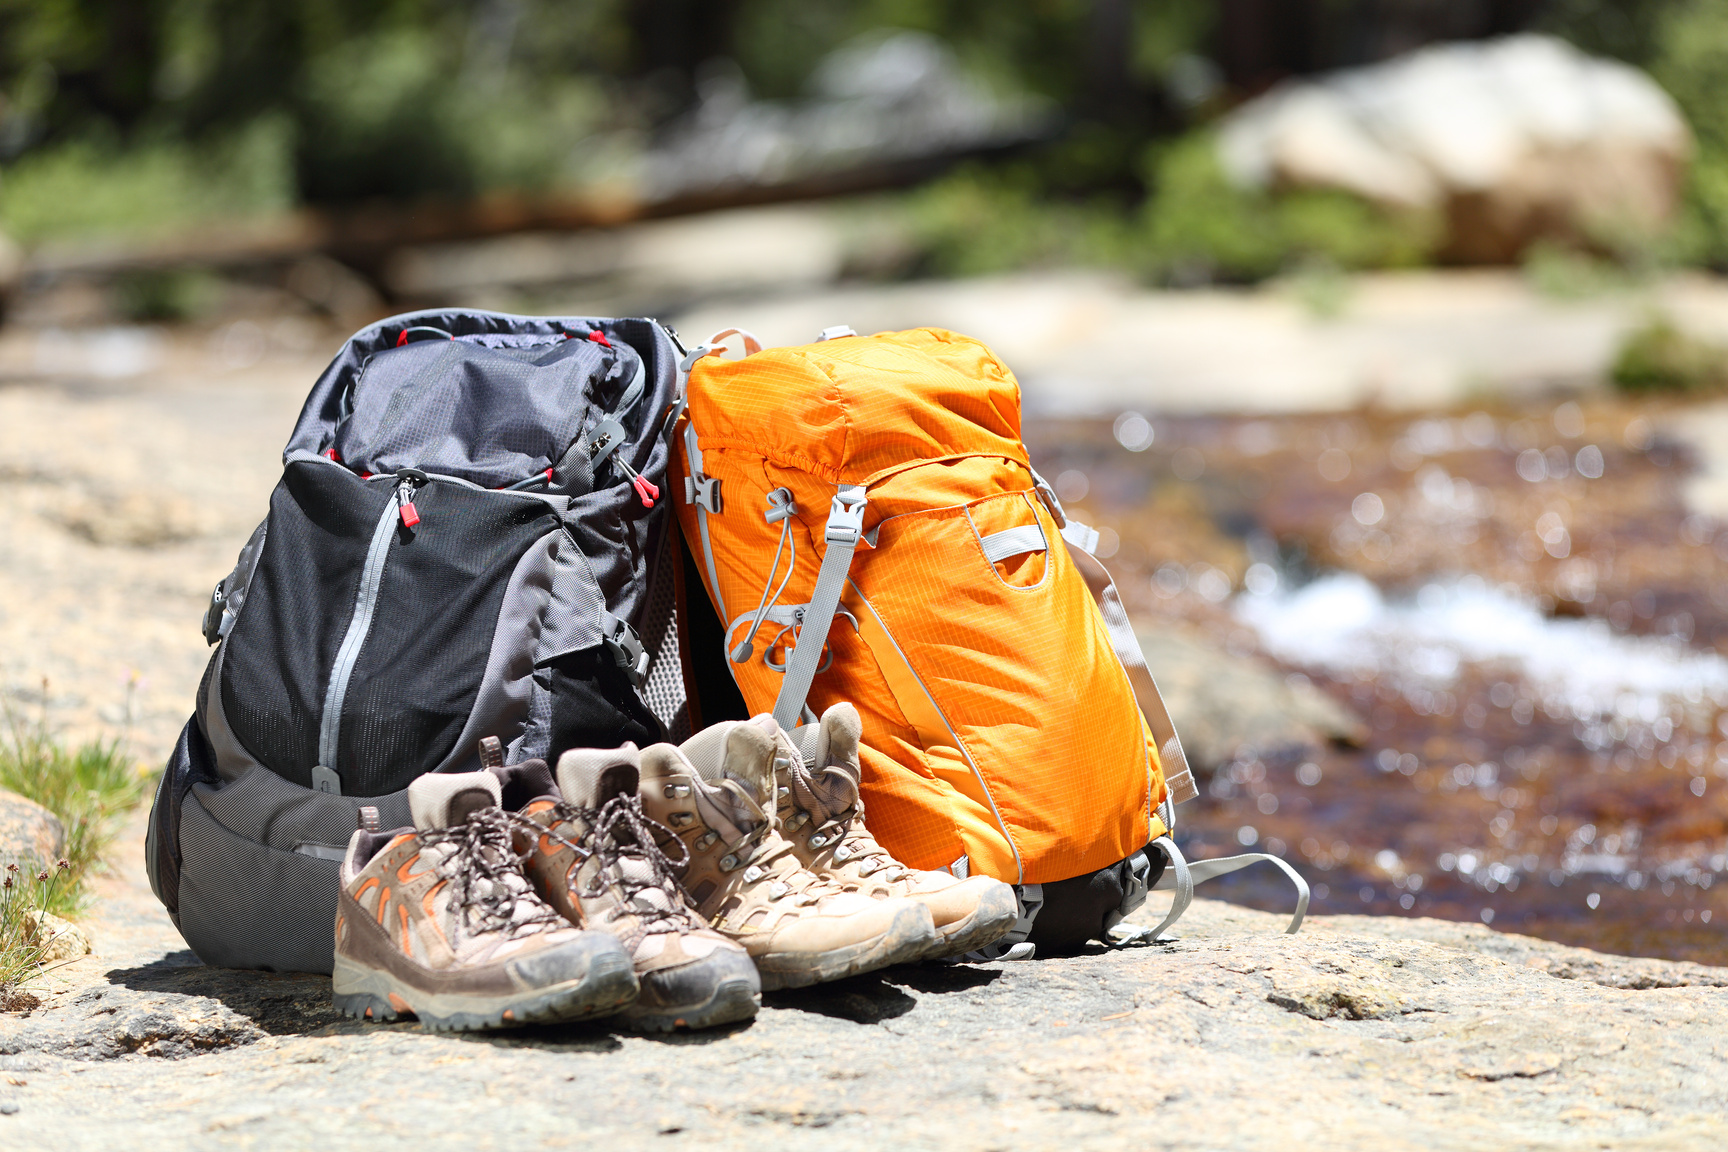 Hiking Backpacks and Shoes